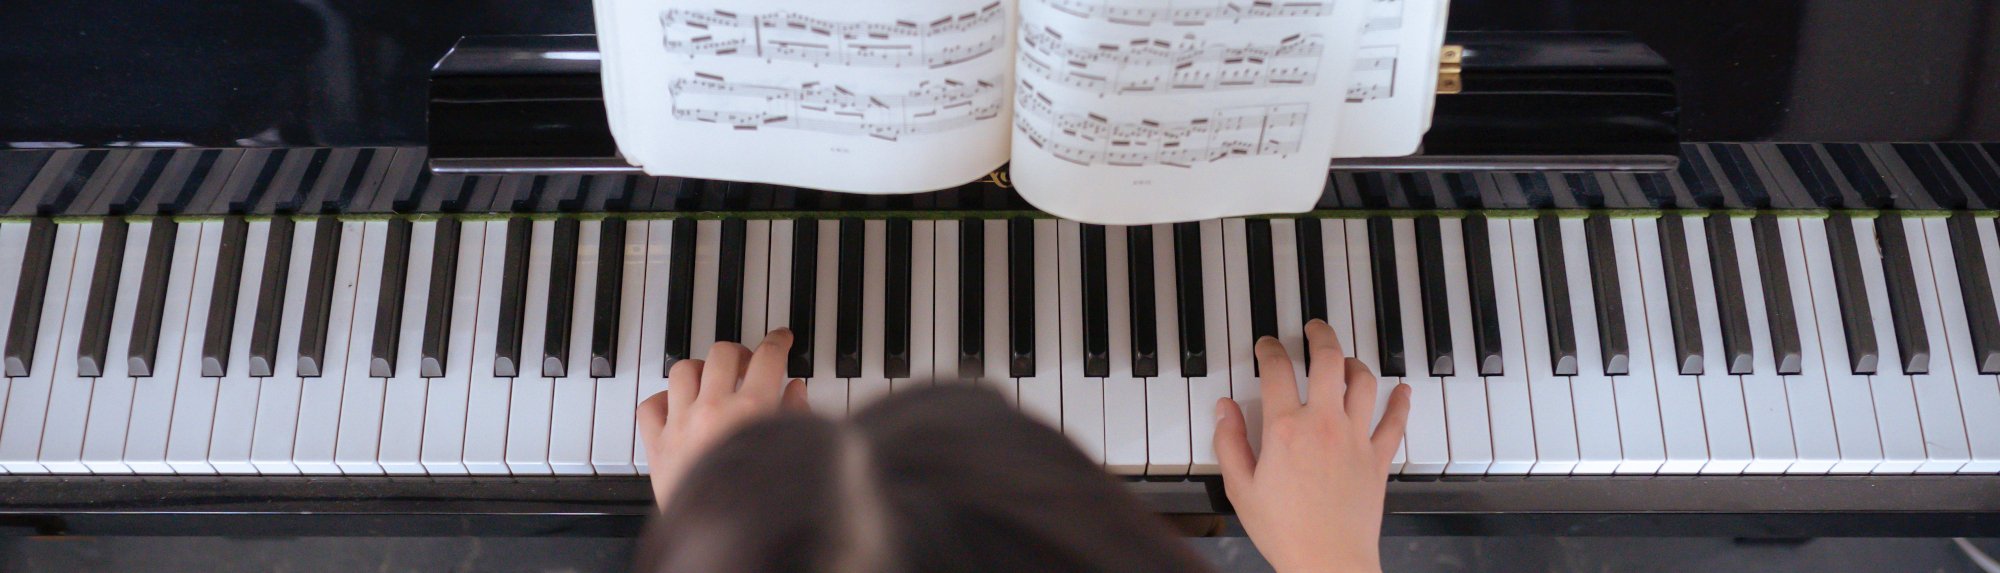 Student practicing on piano with sheet music to follow